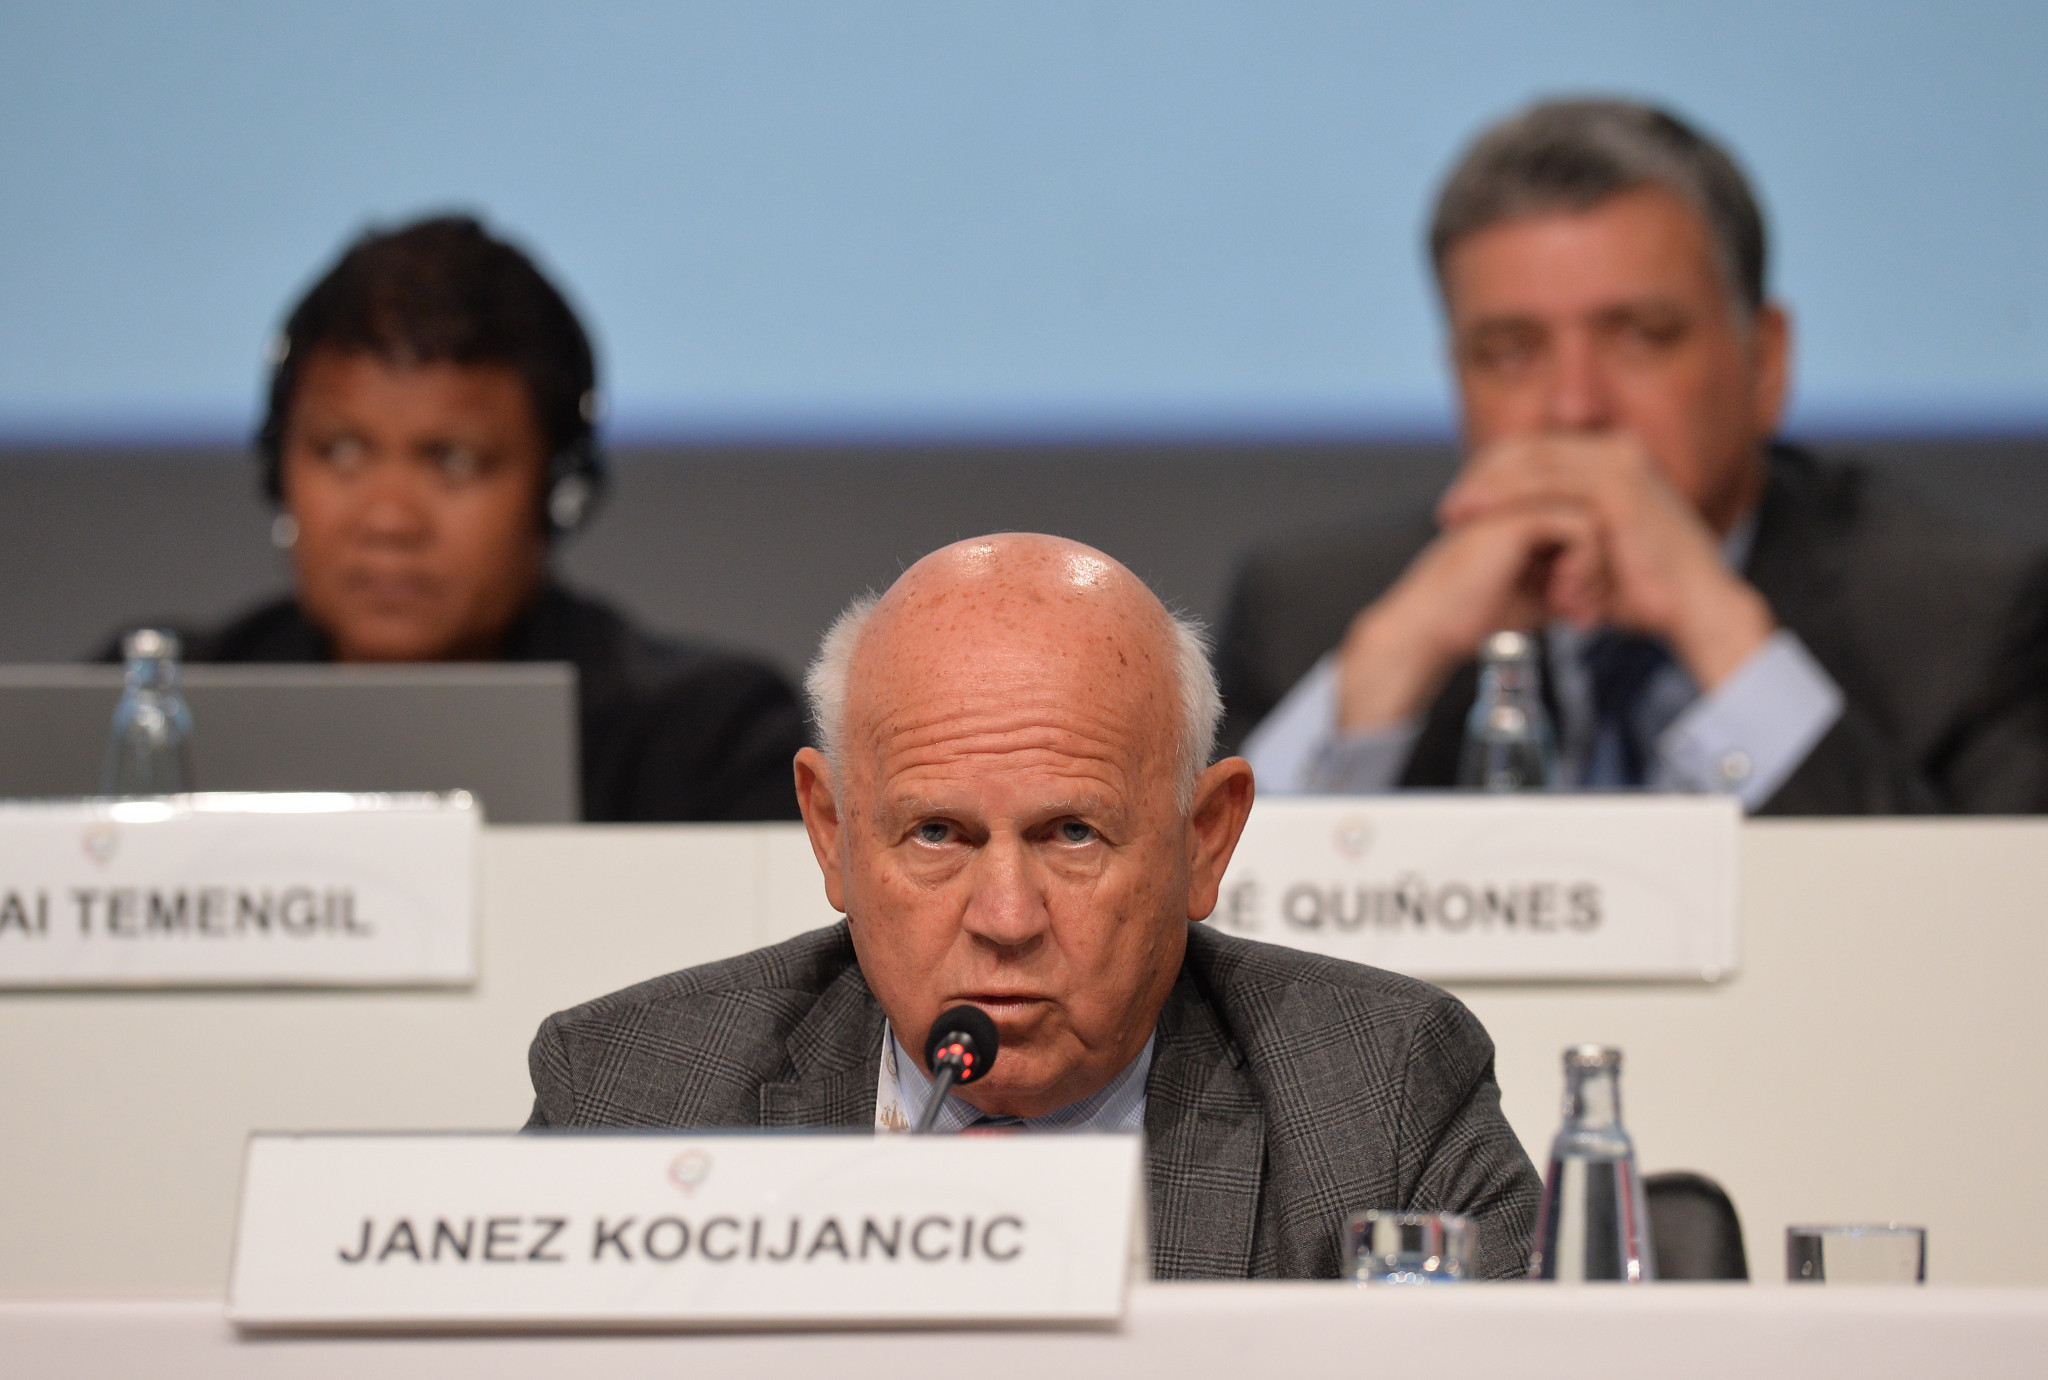 Kocijančič opposes IOC decision on Russia as European Olympic Committees struggle to reach collective position